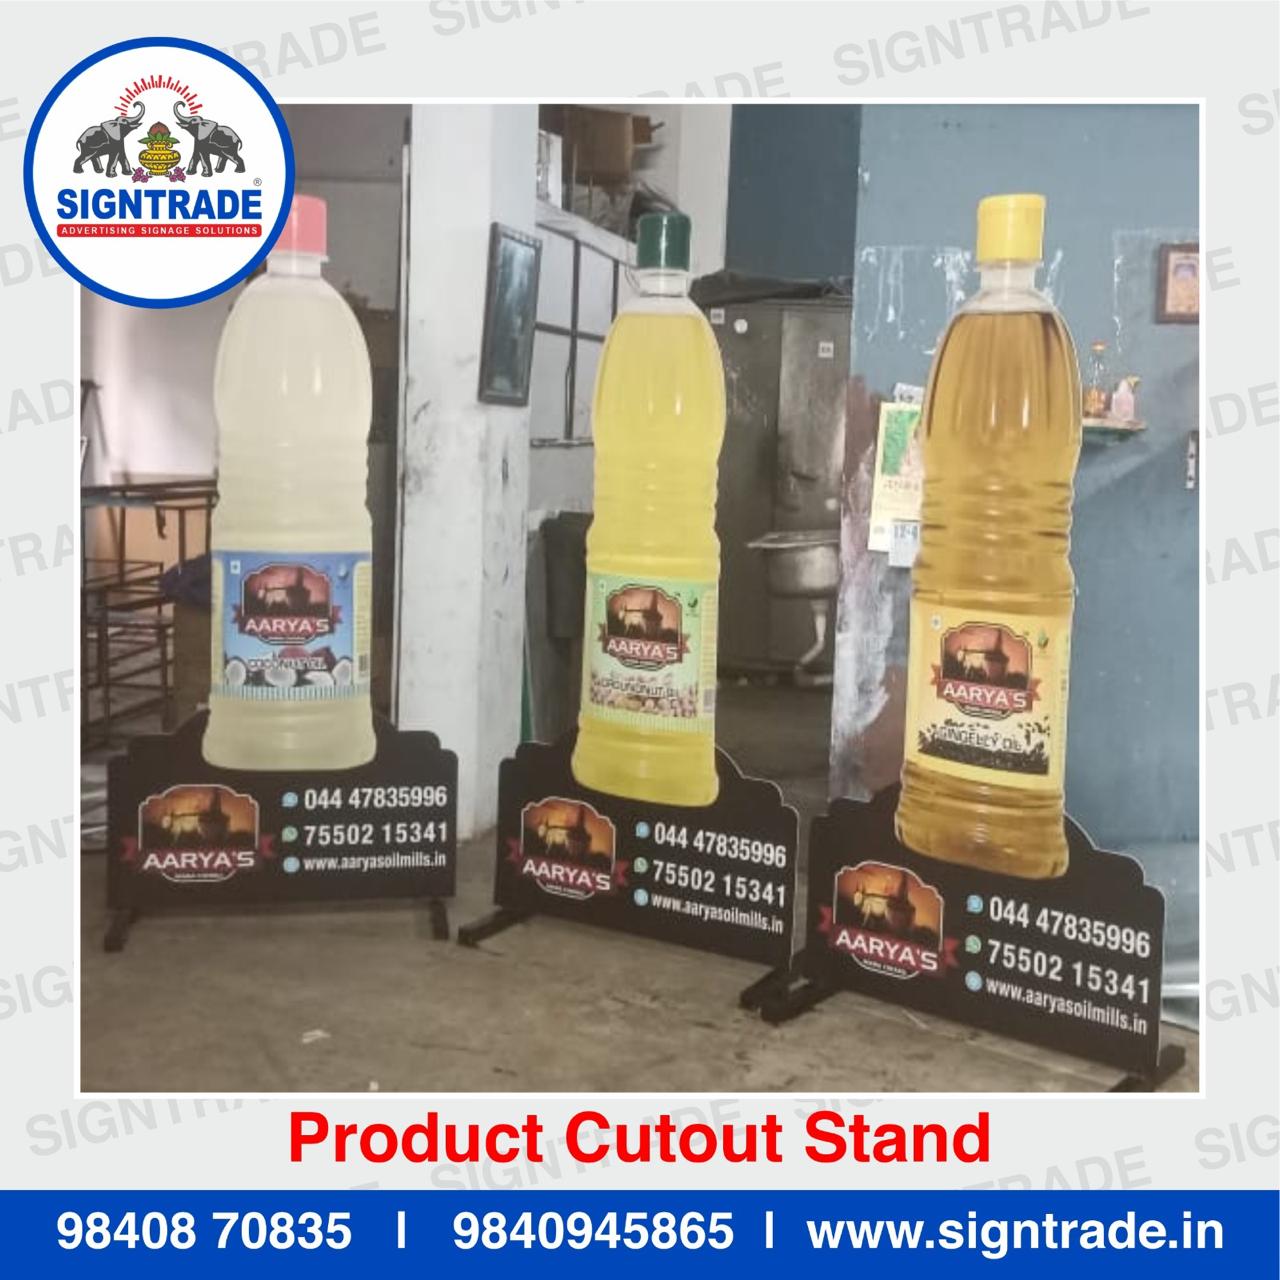 Product Cutout Display Stand in Chennai